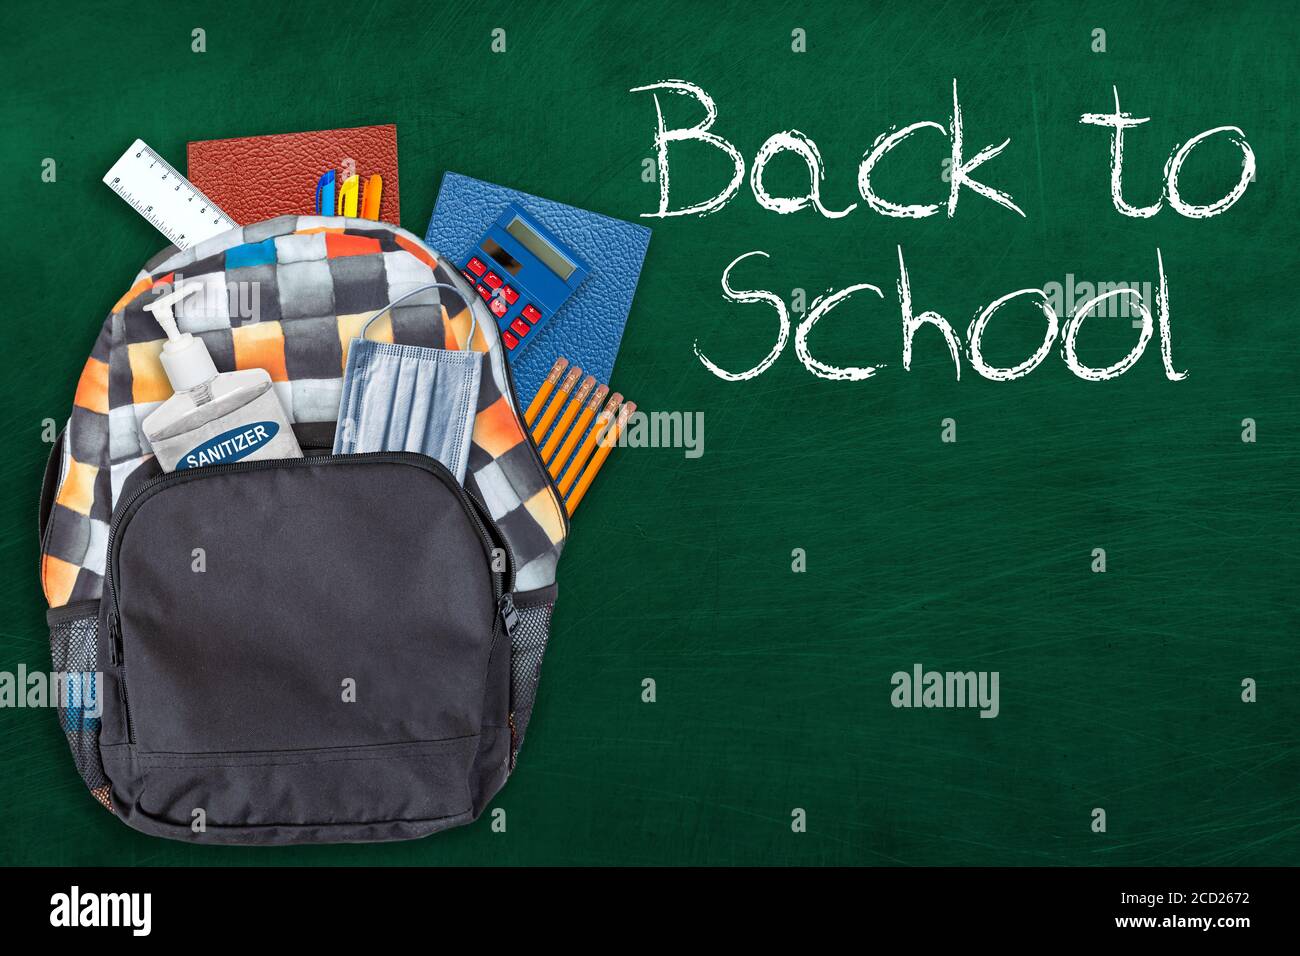 Back to school education concept in the new normal during Covid-19 pandemic with backpack stuffed with stationery, hand sanitizer and face mask on cha Stock Photo